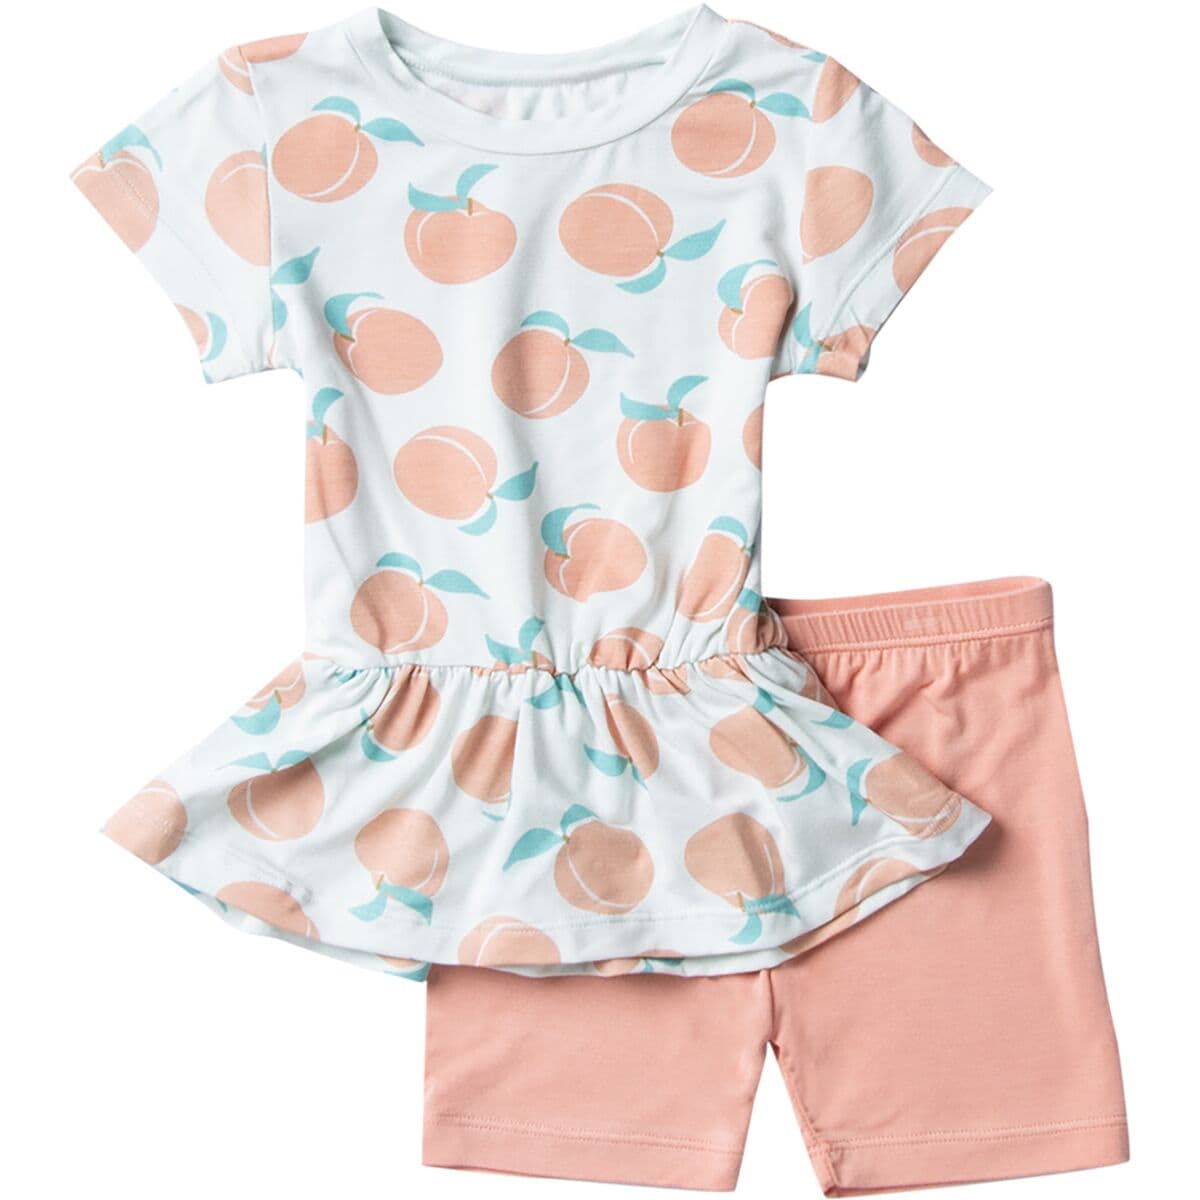 Kickee Pants Short-Sleeve Playtime Outfit Set - Toddlers'